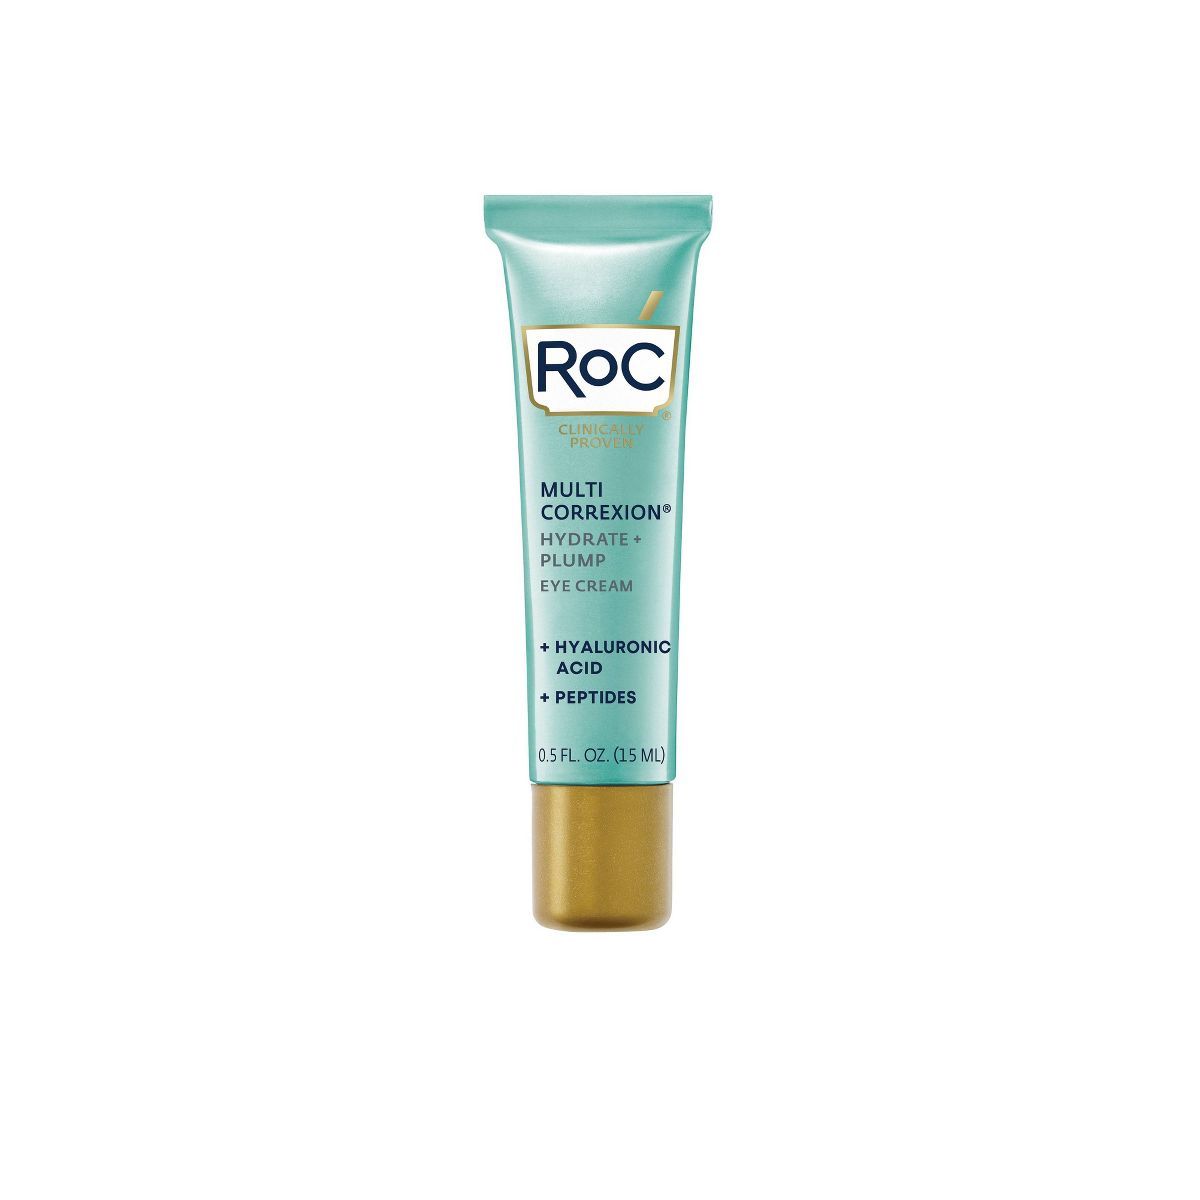 RoC Multi Correxion Hydrate + Plump Eye Cream with Hyaluronic Acid - 0.5oz | Target